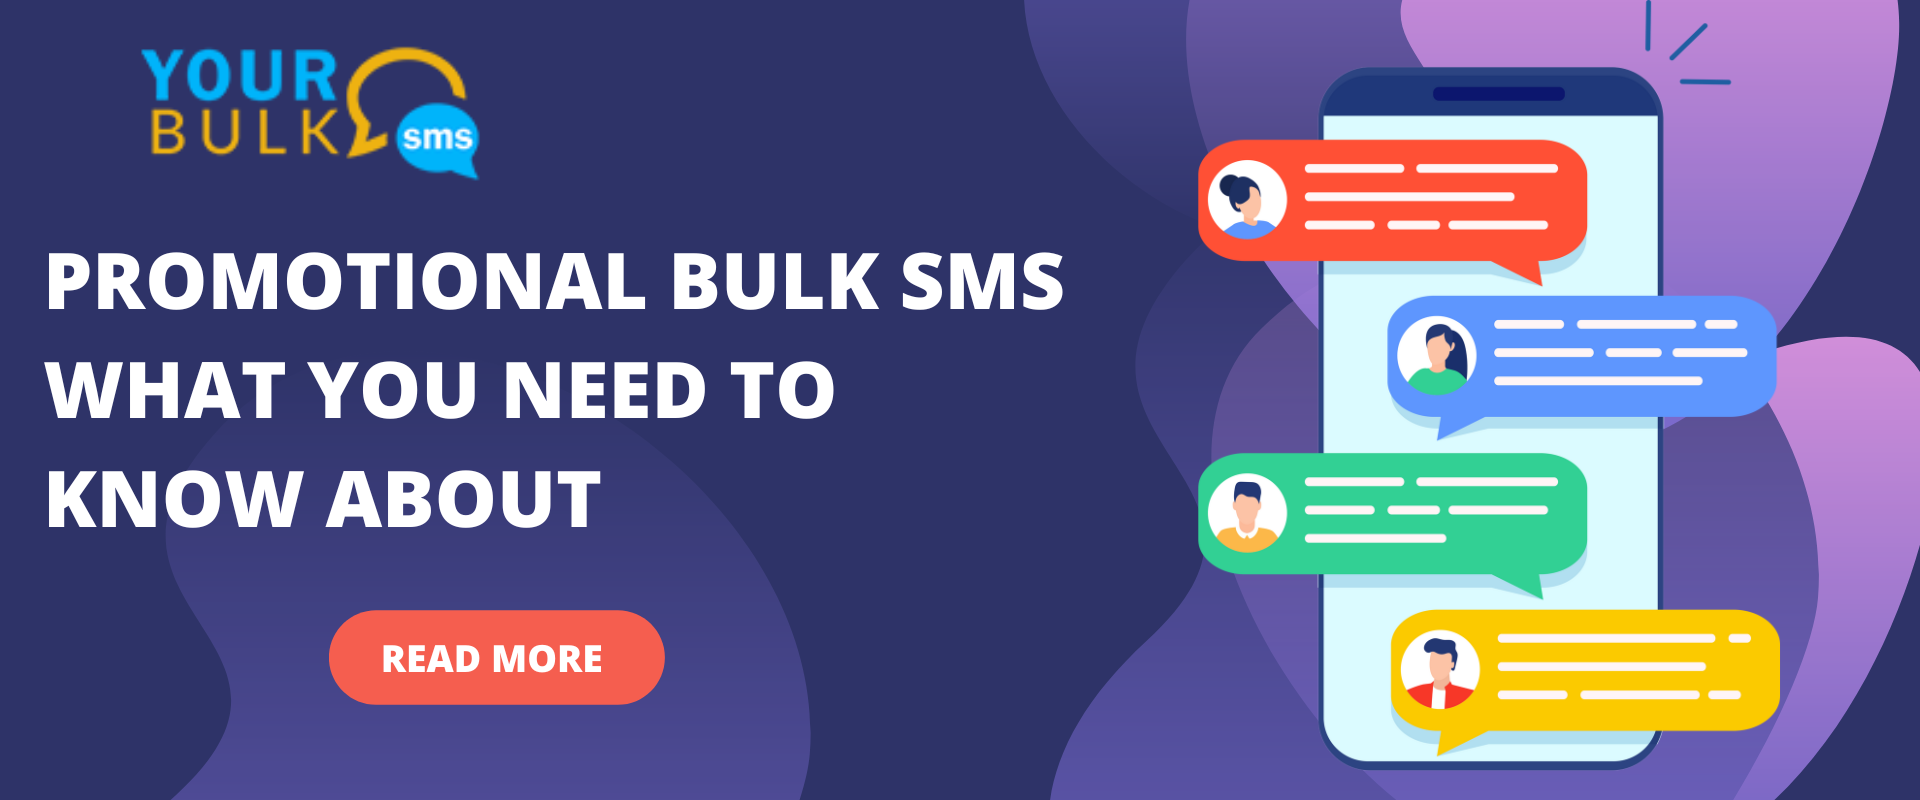 Promotional Bulk SMS - What You Need To Know About